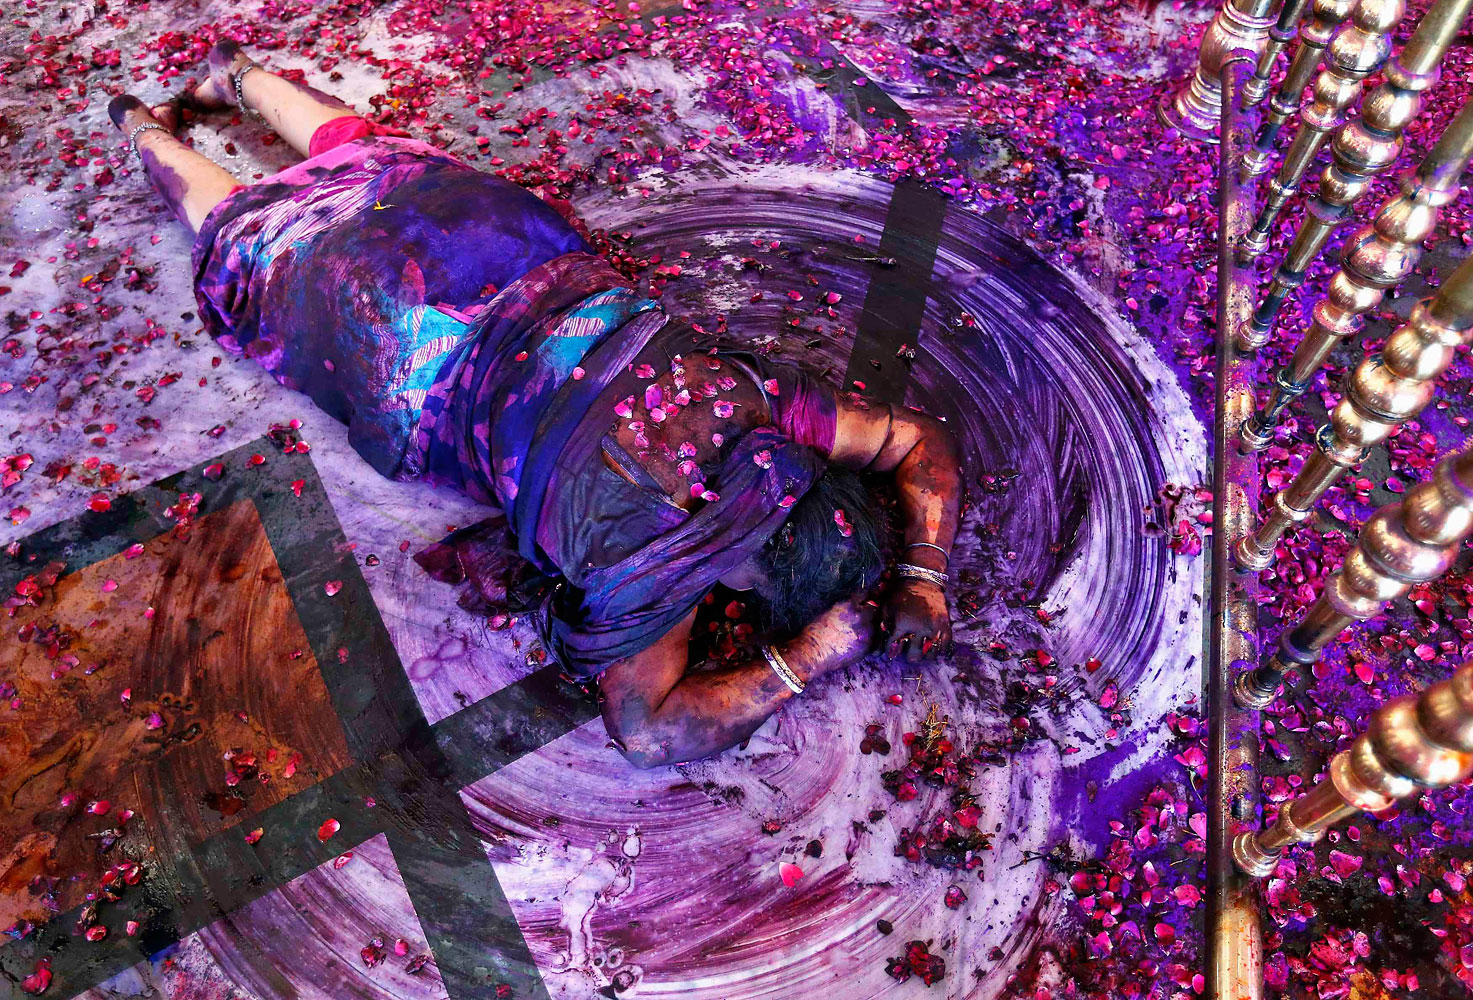 A Hindu woman prays while lying on the floor of a temple during Holi celebrations in the western Indian city of Ahmedabad, March 17, 2014.